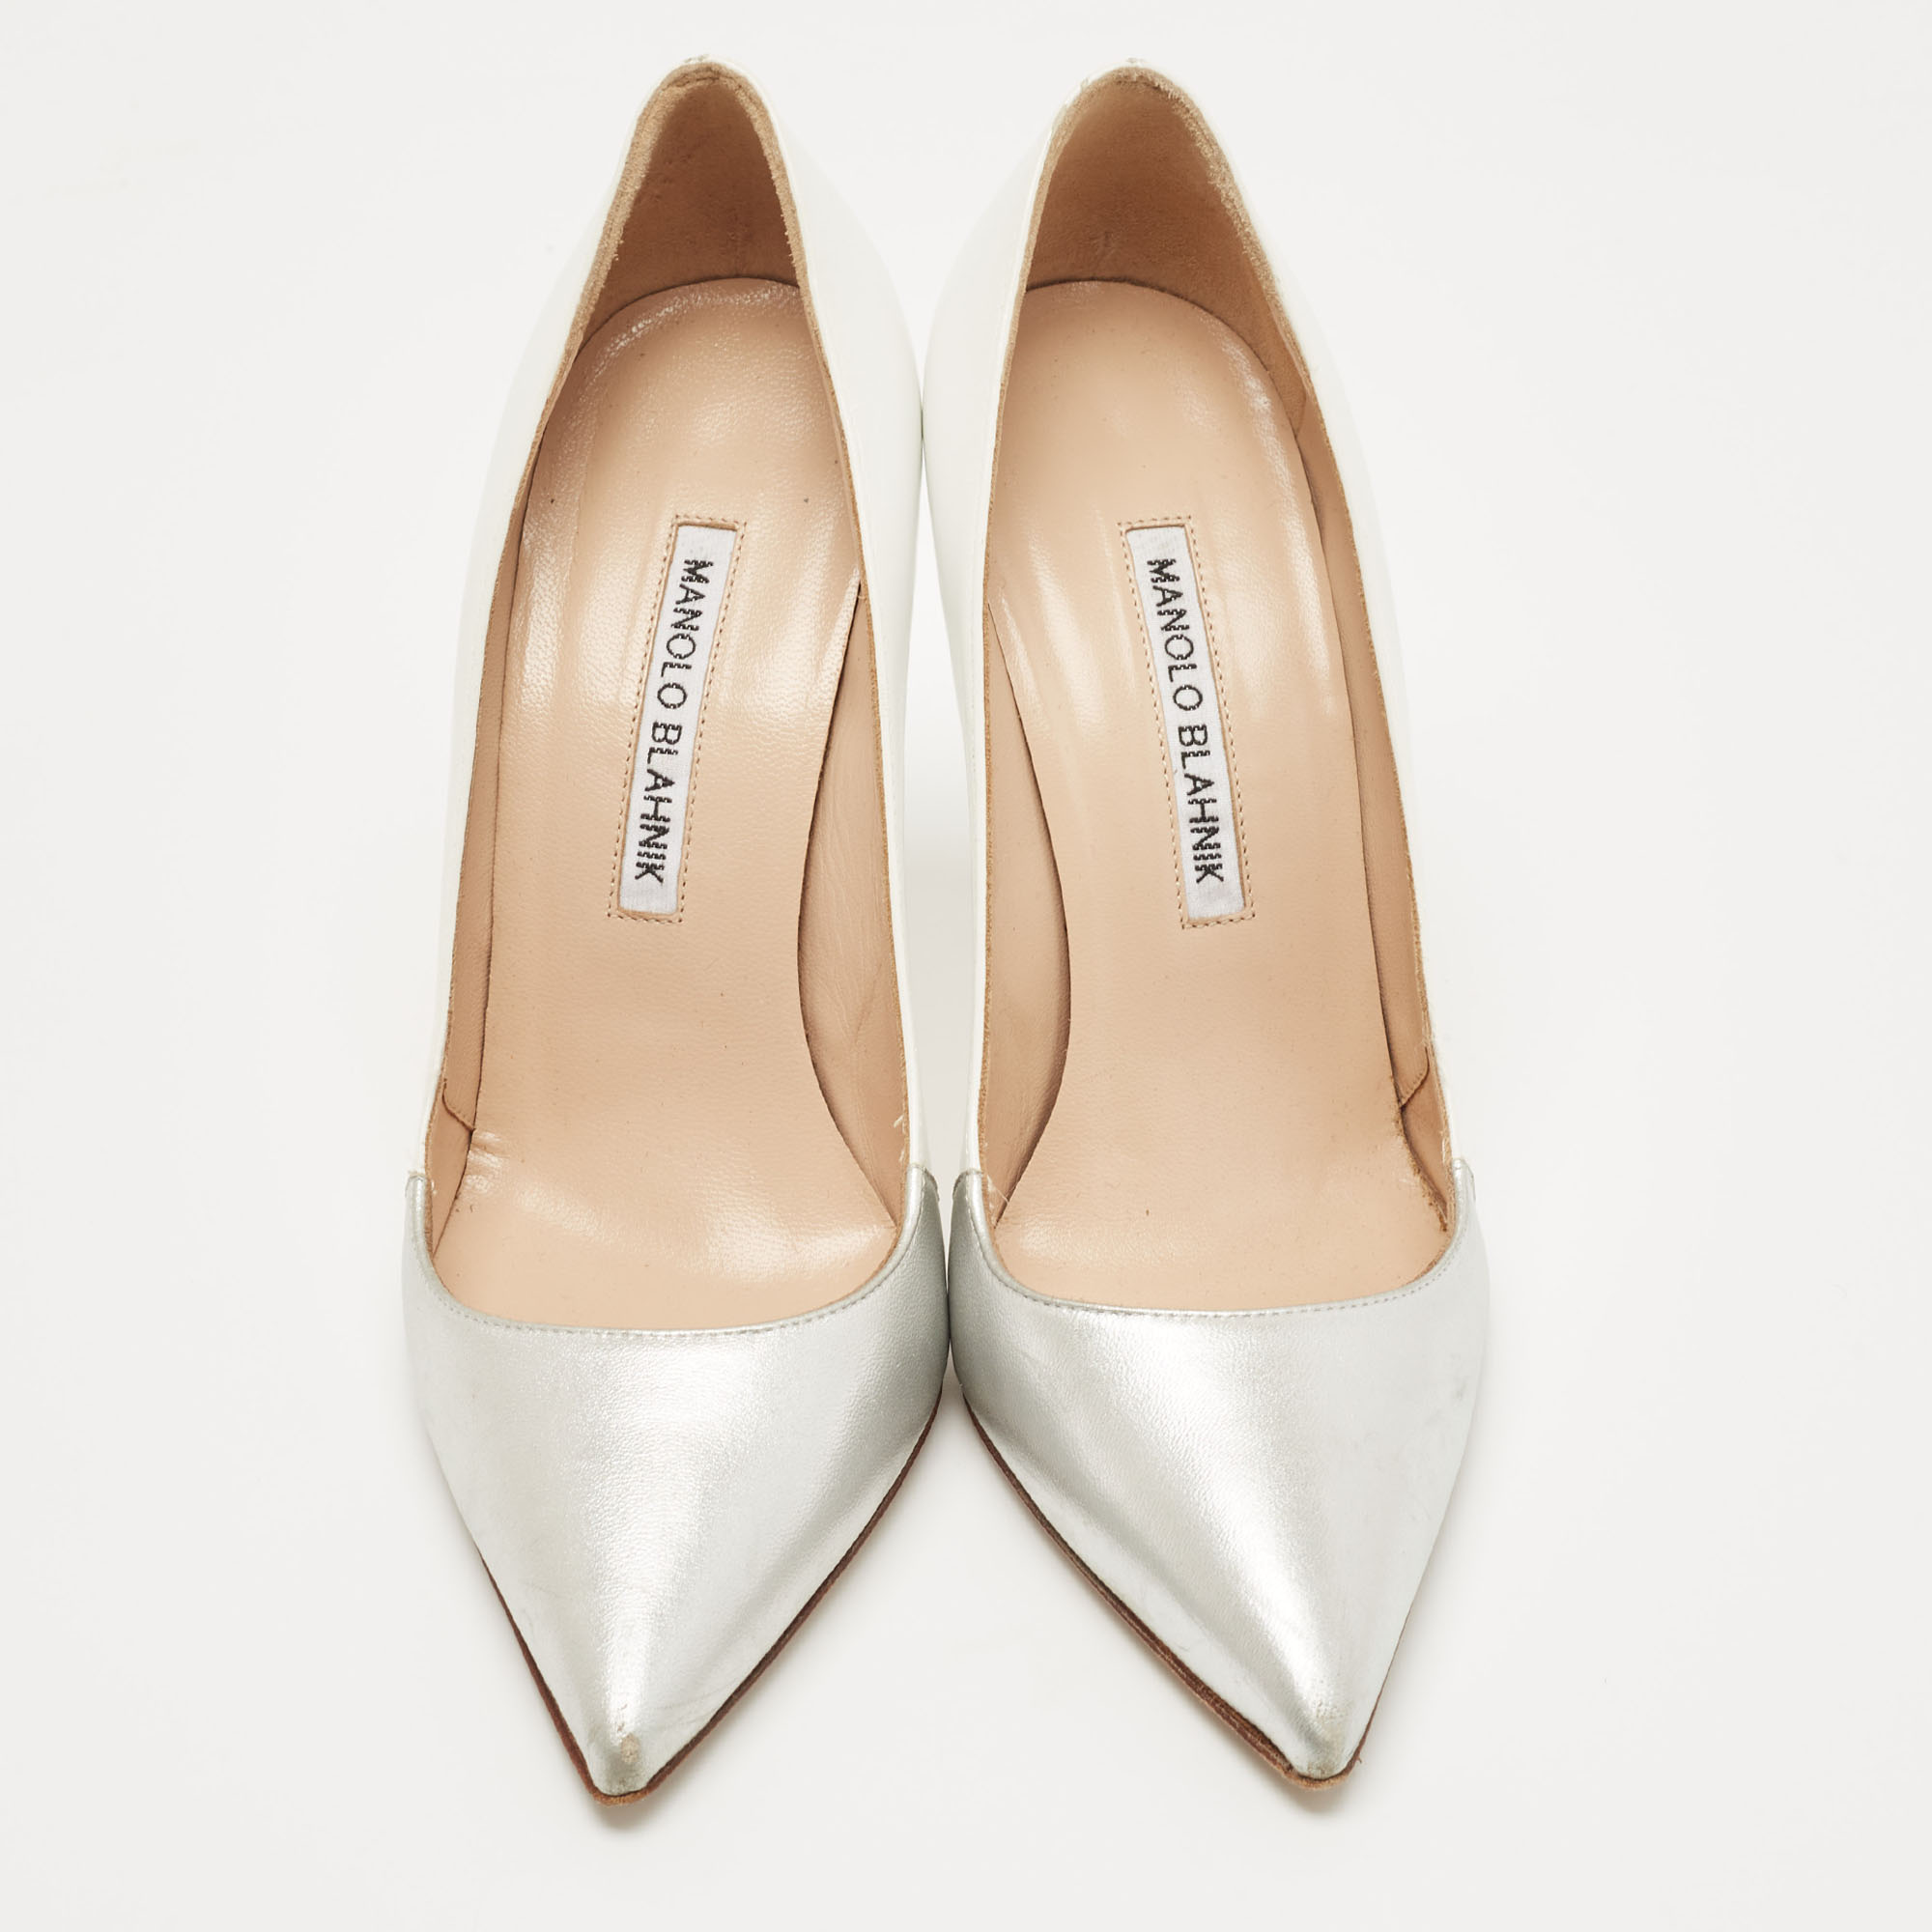 Manolo Blahnik Silver/White Leather  BB Pointed Toe  Pumps Size 36.5